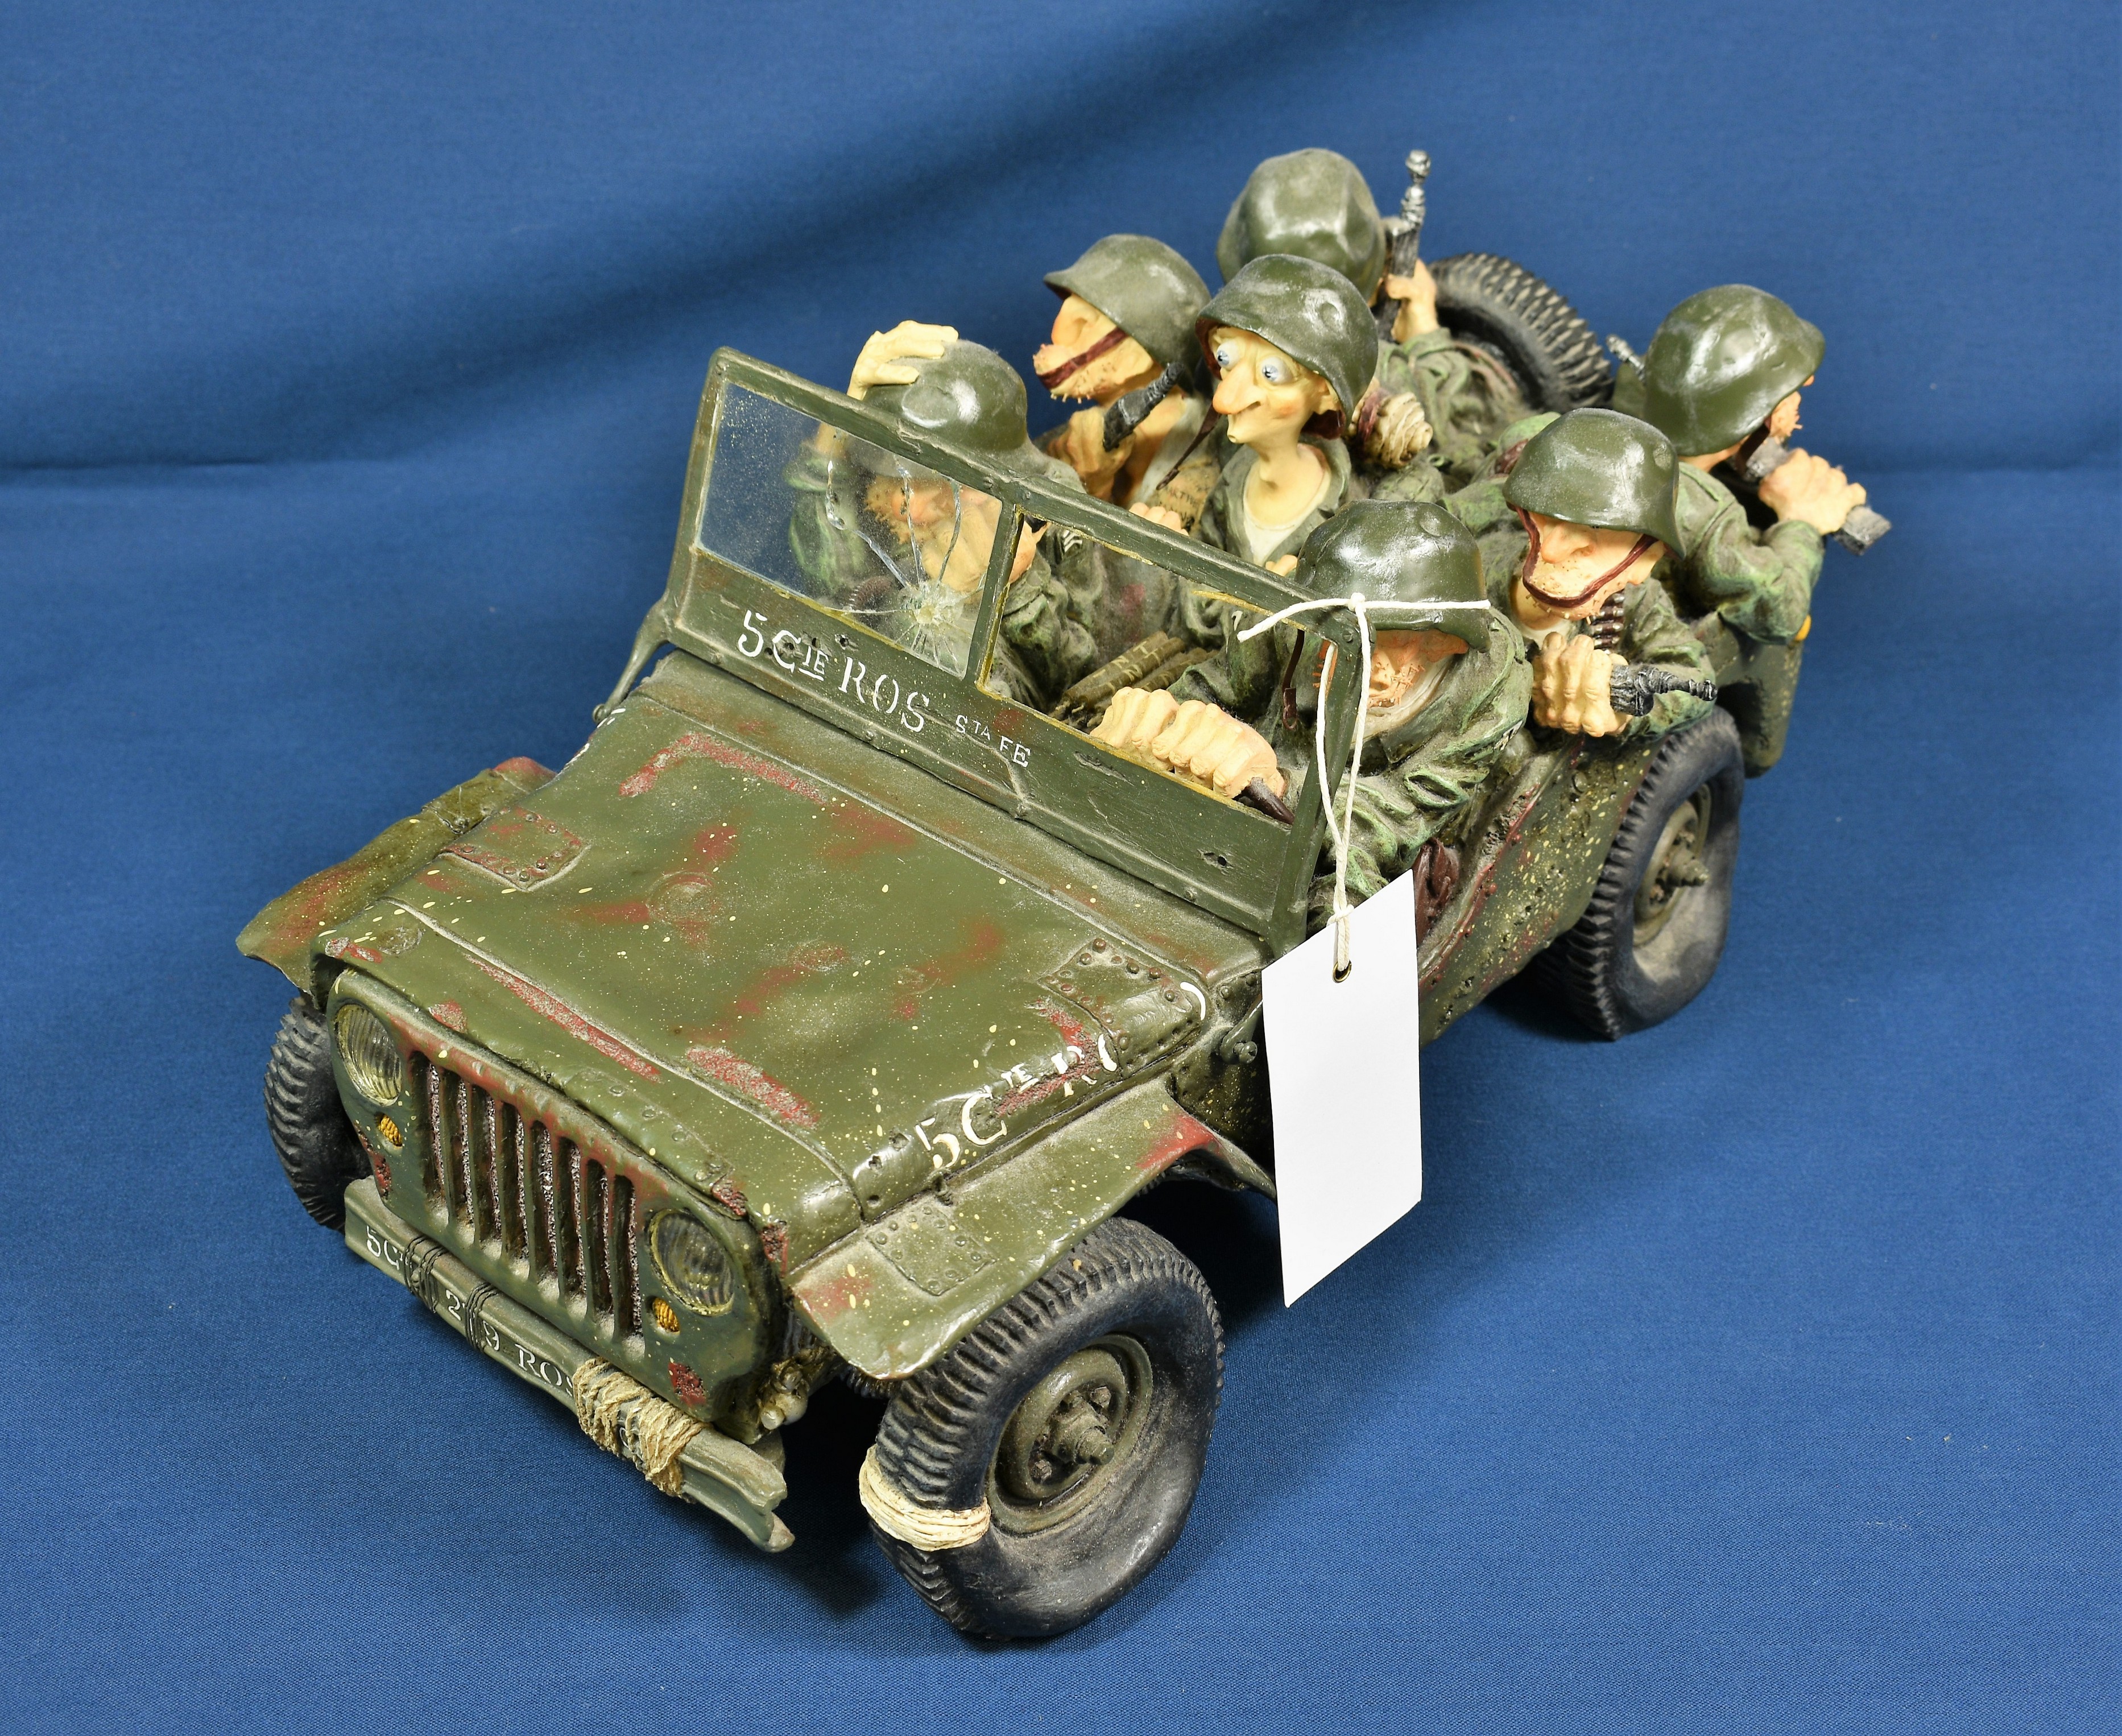 A Guillermo Forchino "Tour of Duty" army jeep.